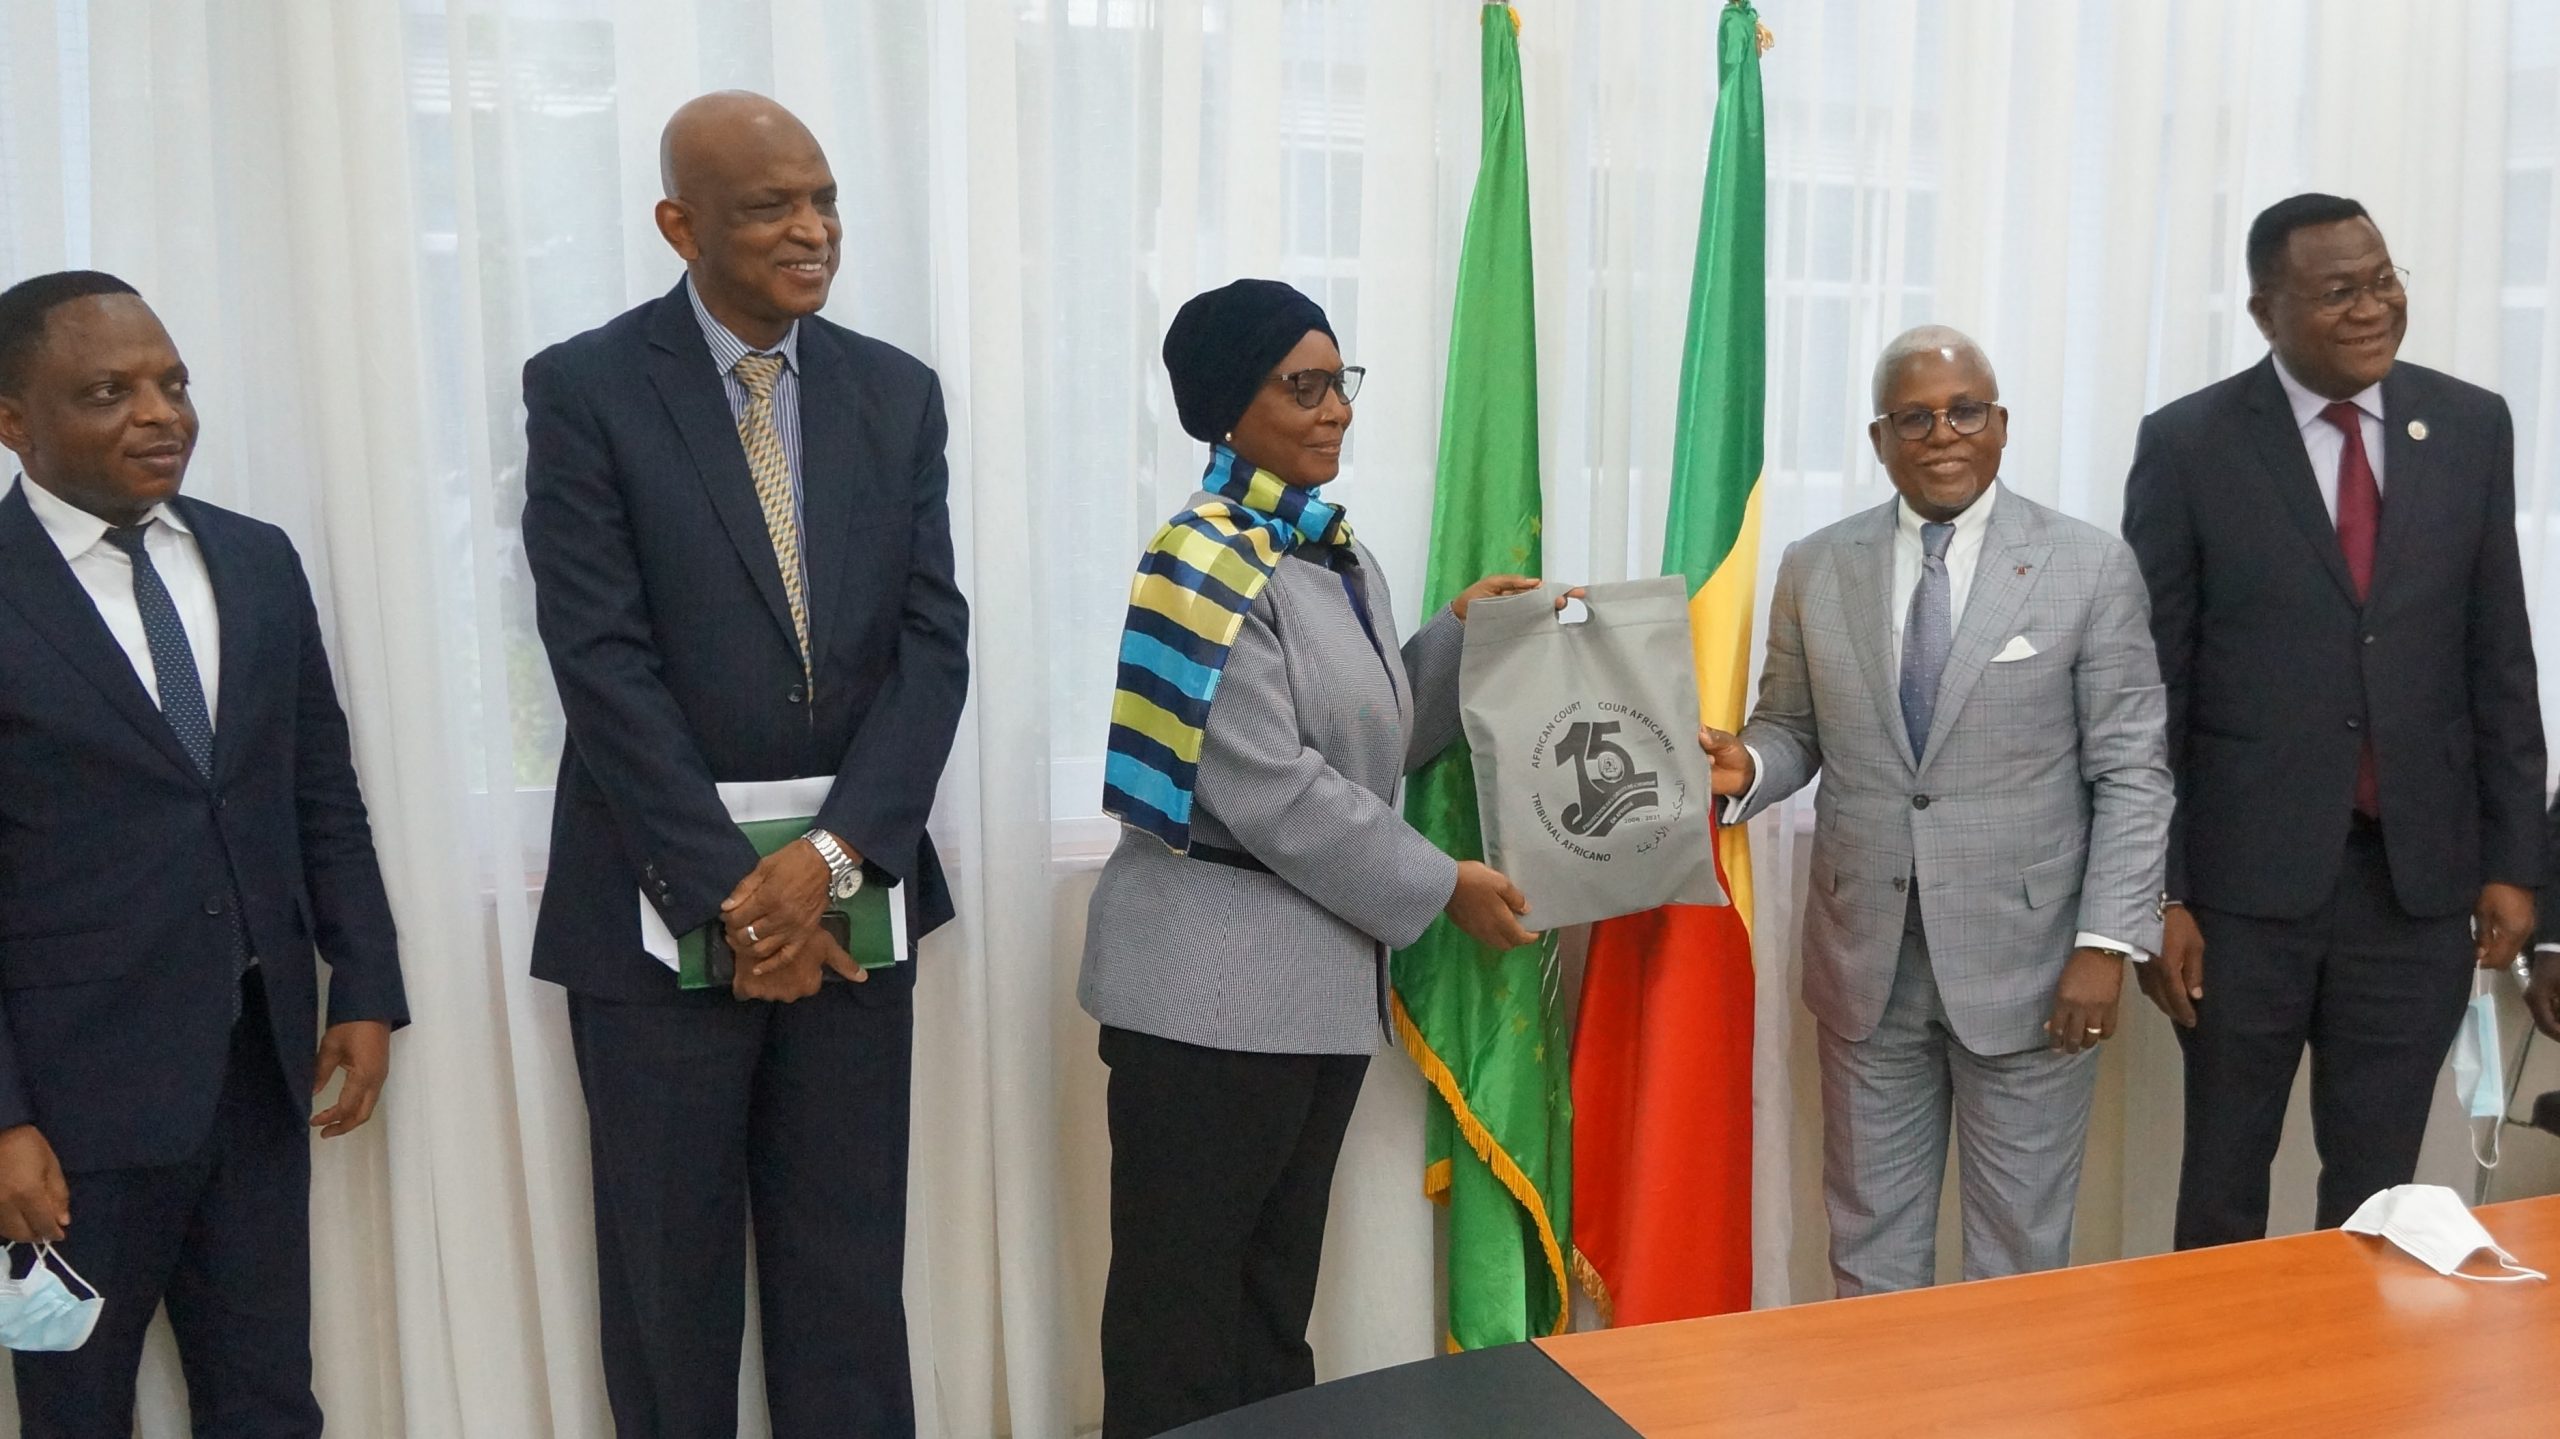 BENIN TO WORK CLOSELY WITH THE AFRICAN COURT TO STRENGTHEN HUMAN RIGHTS